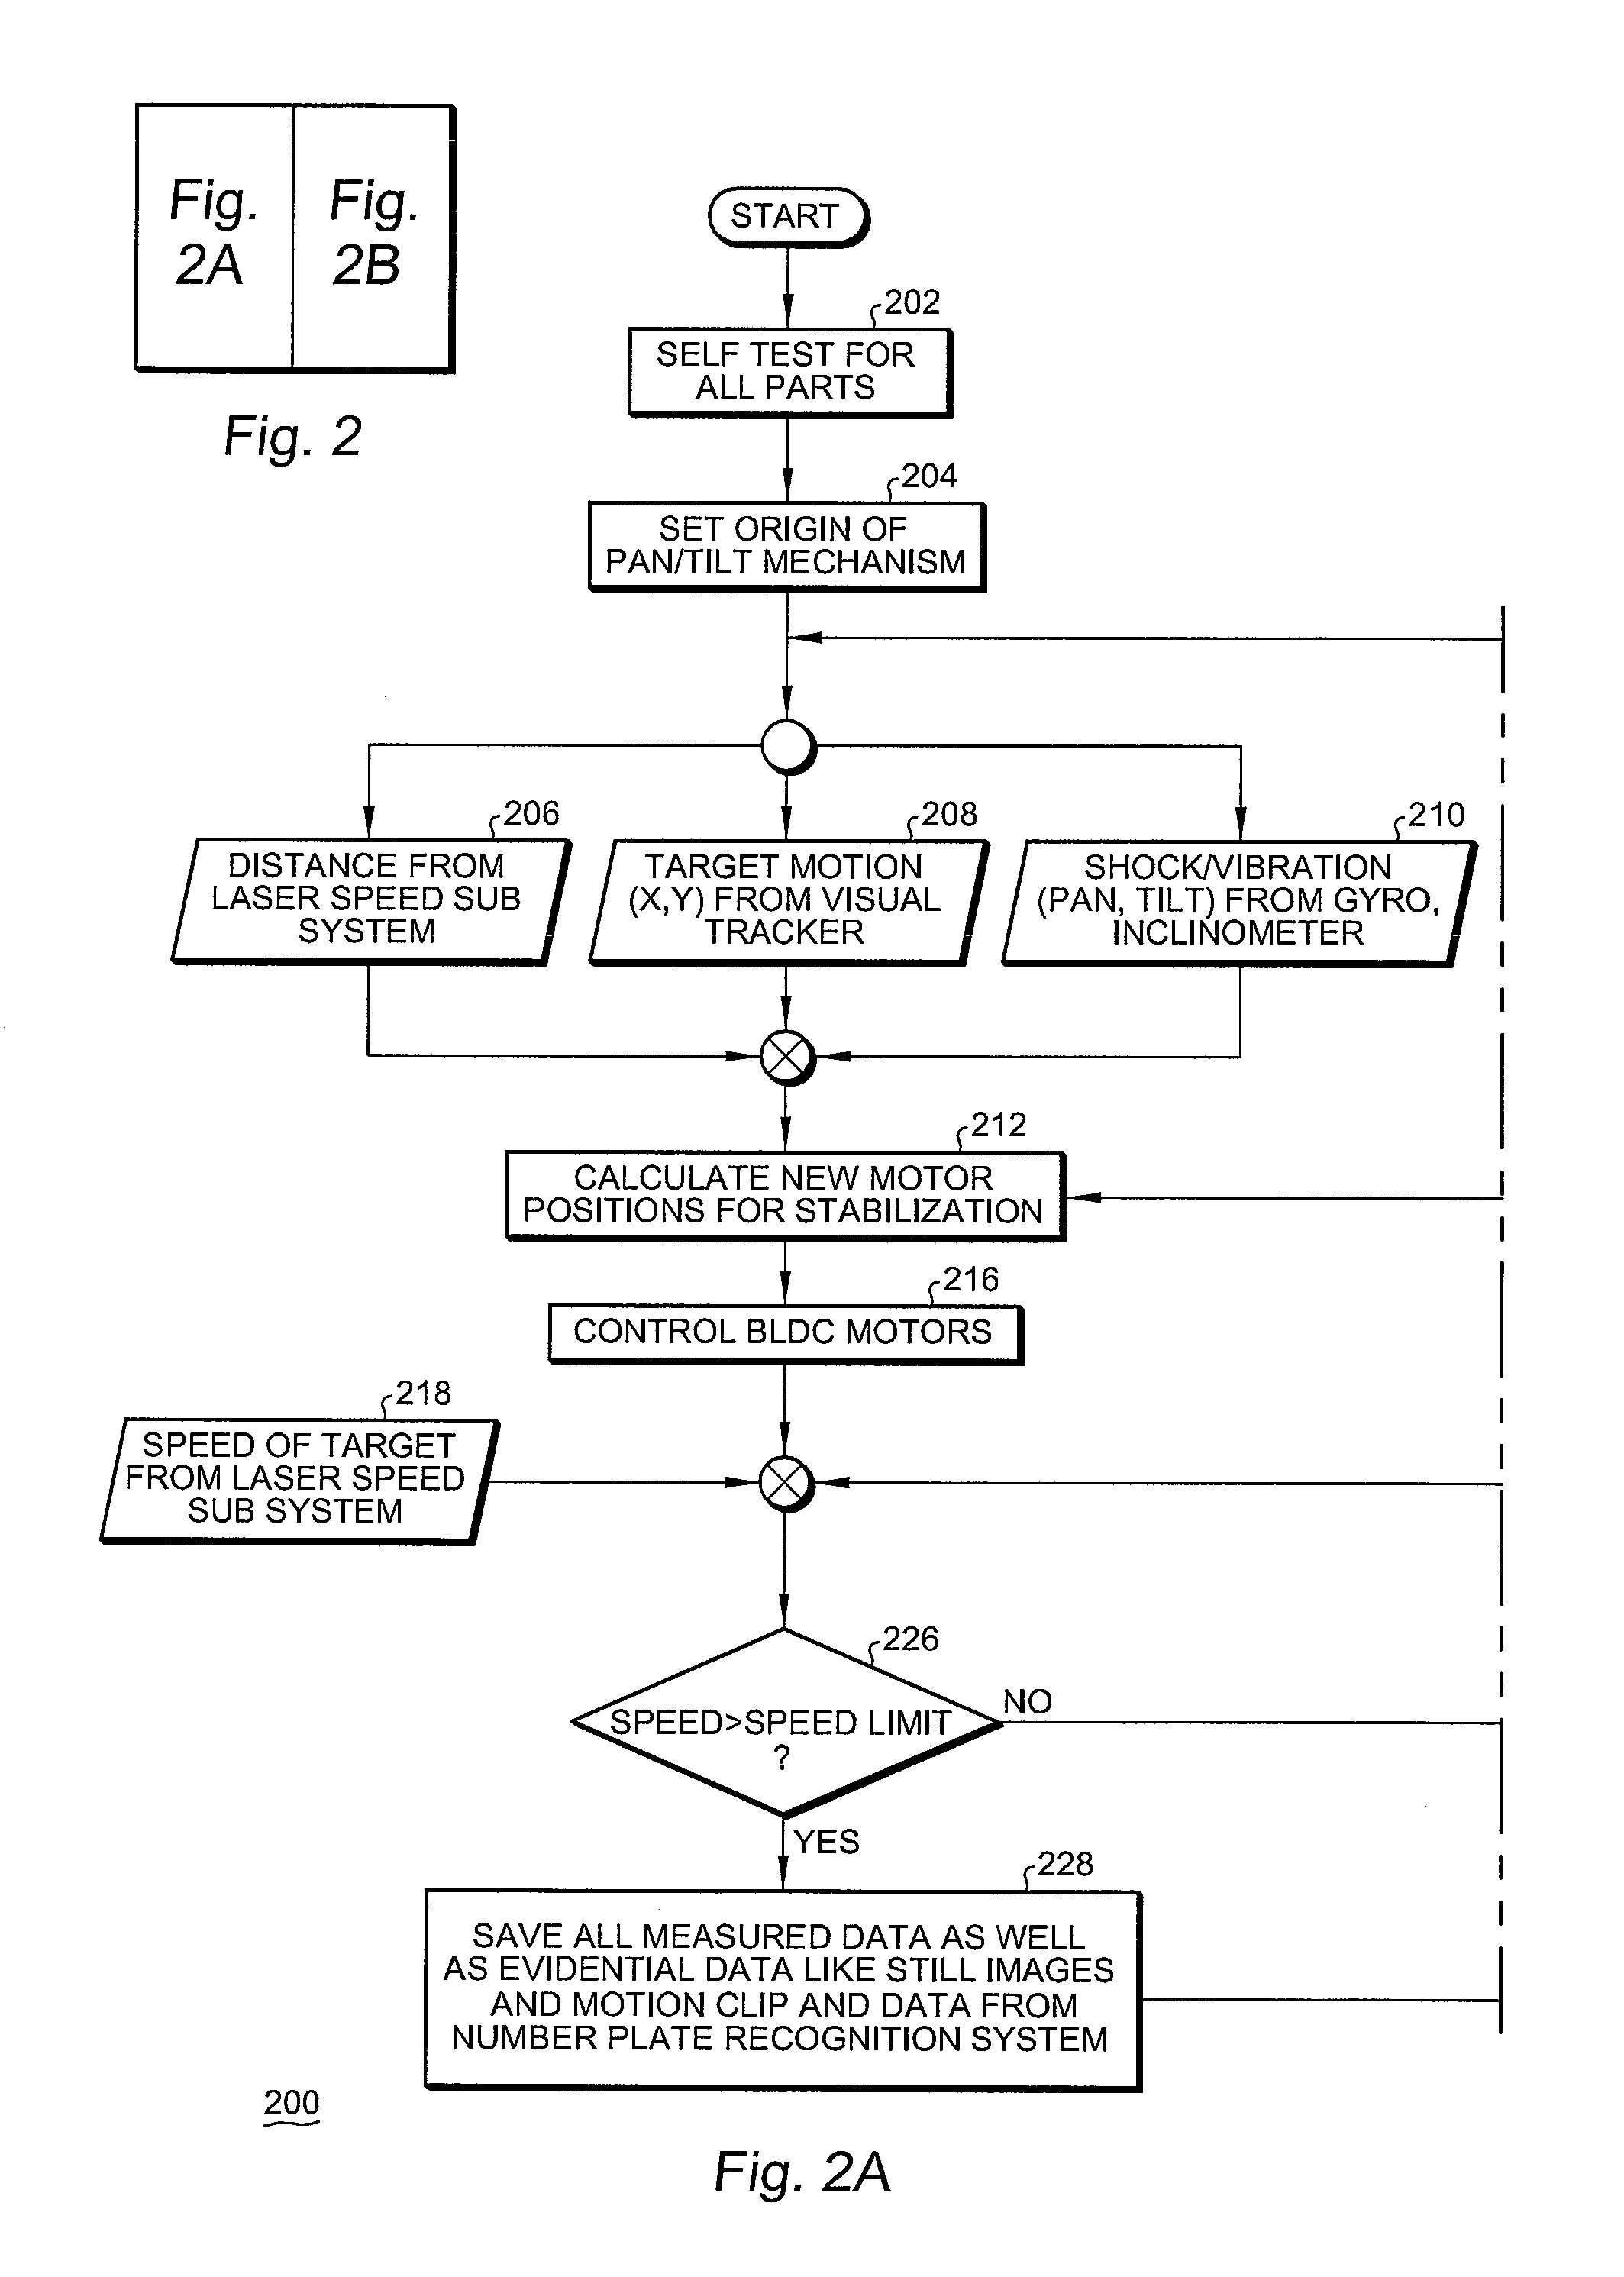 Intelligent laser tracking system and method for mobile and fixed position traffic monitoring and enforcement applications